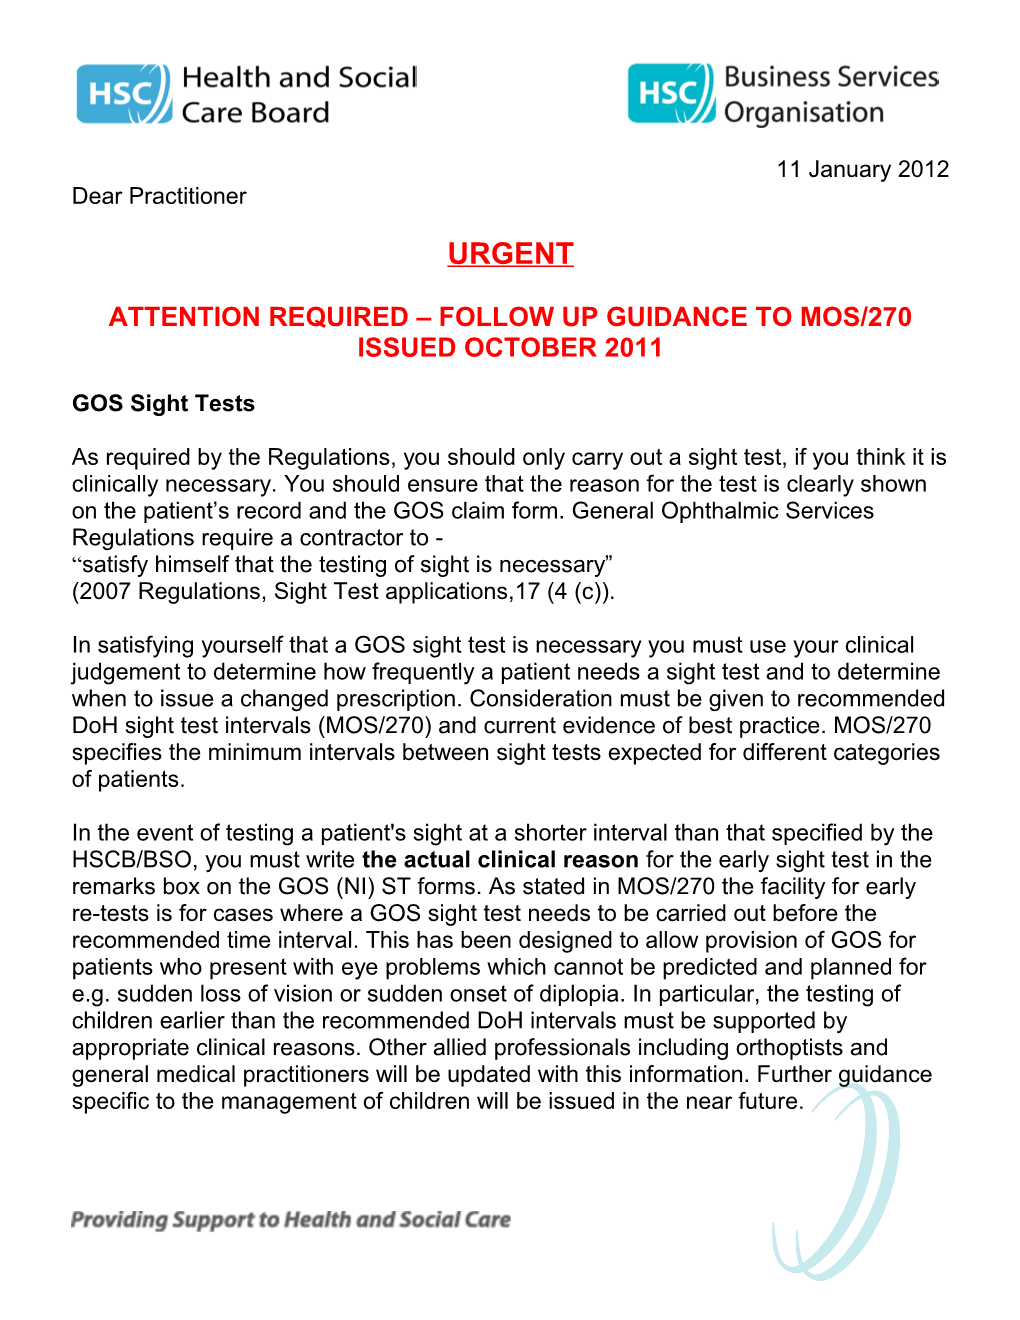 Attention Required Follow up Guidance to Mos/270 Issued October 2011